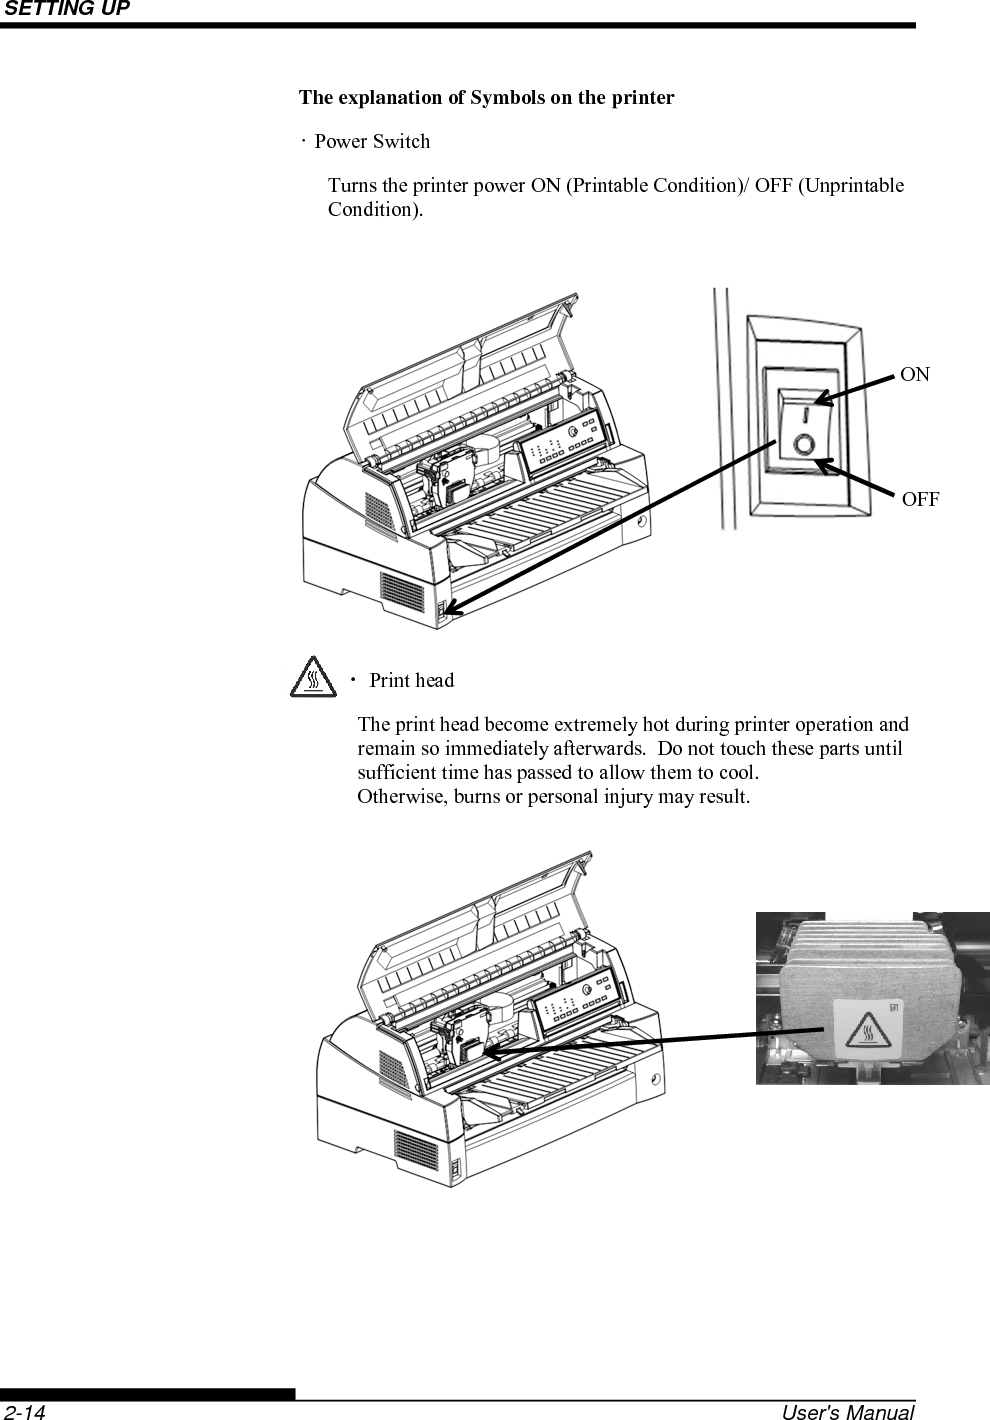 SETTING UP    2-14  User&apos;s Manual The explanation of Symbols on the printer • Power Switch Turns the printer power ON (Printable Condition)/ OFF (Unprintable Condition).            ・ Print head The print head become extremely hot during printer operation and remain so immediately afterwards.  Do not touch these parts until sufficient time has passed to allow them to cool. Otherwise, burns or personal injury may result.             ON OFF 